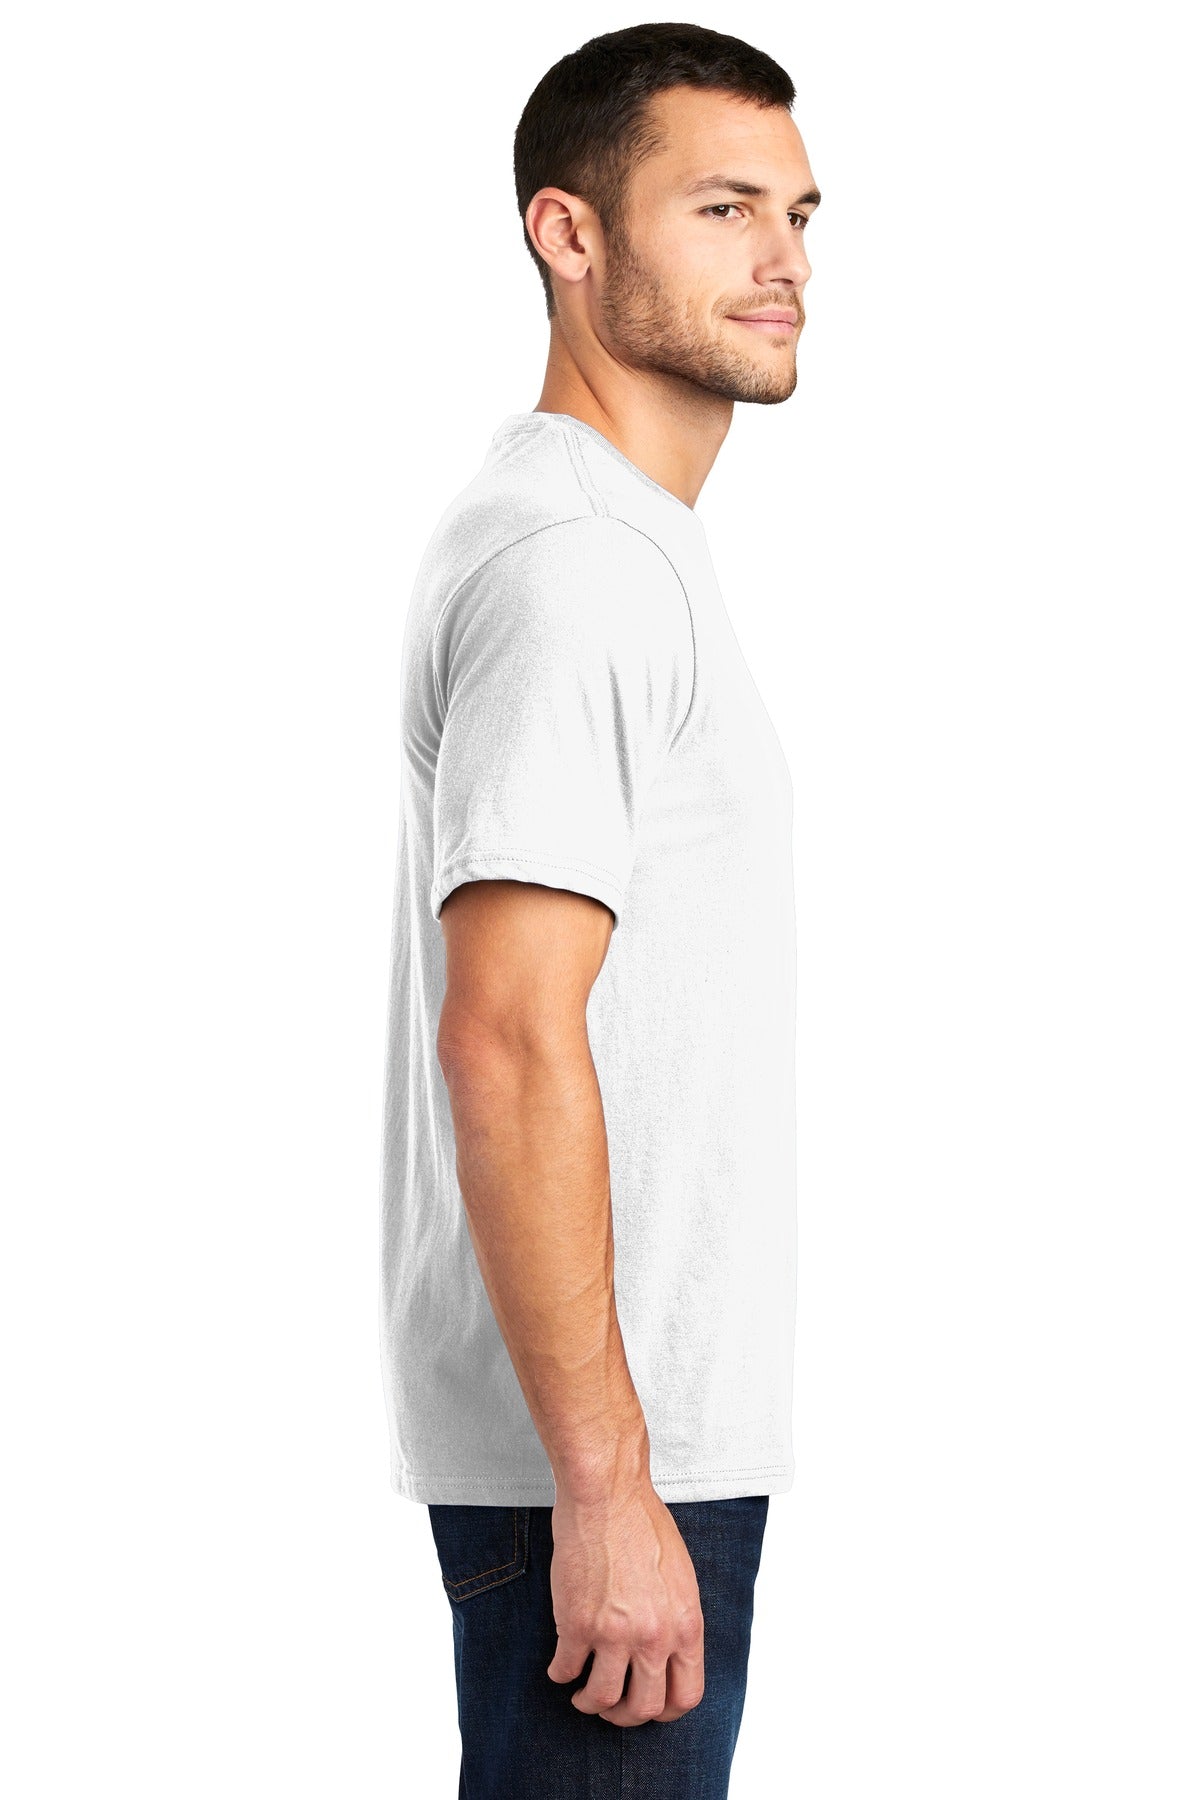 District® Very Important Tee®. DT6000 [White] - DFW Impression